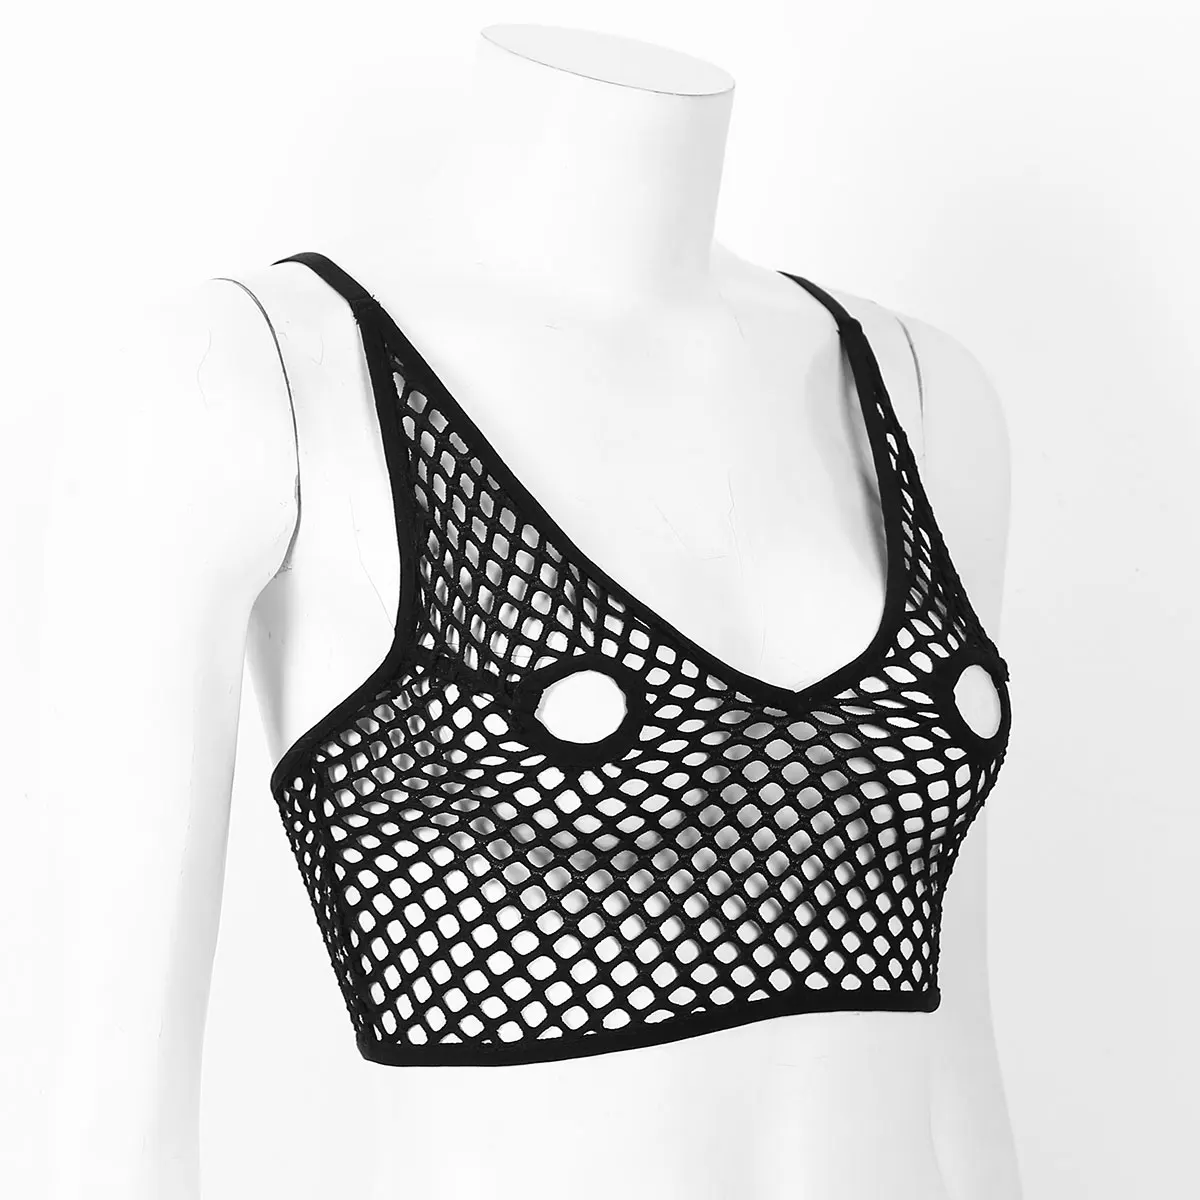 

Women's See Through Netted Sexy Lingerie Erotic Crop Tops Adjustable Straps Open Cups Nipples Hollow Out Longline Bra Crop Top